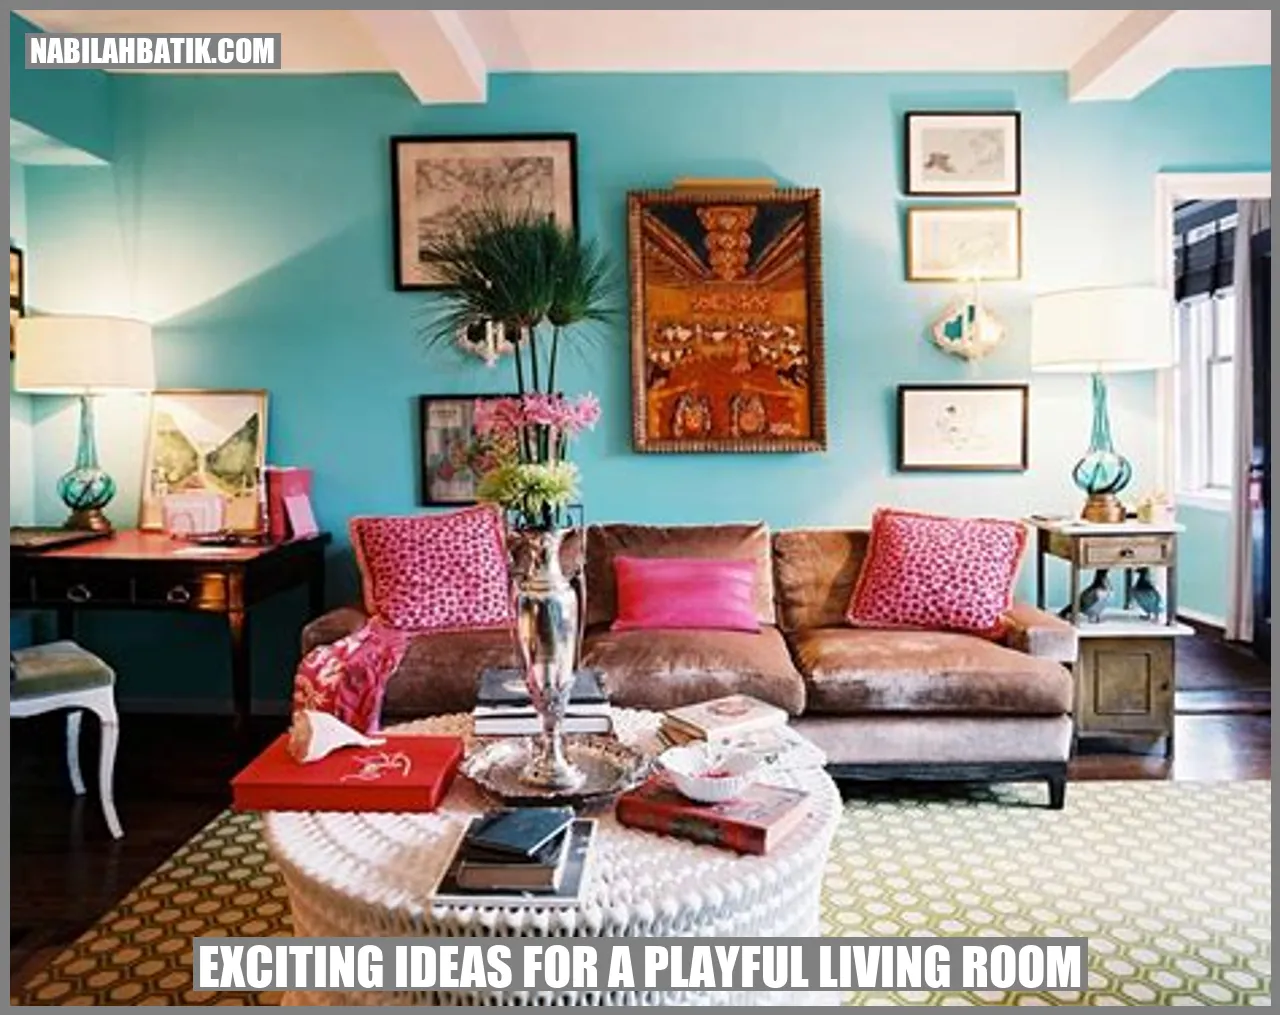 Exciting Ideas for a Playful Living Room